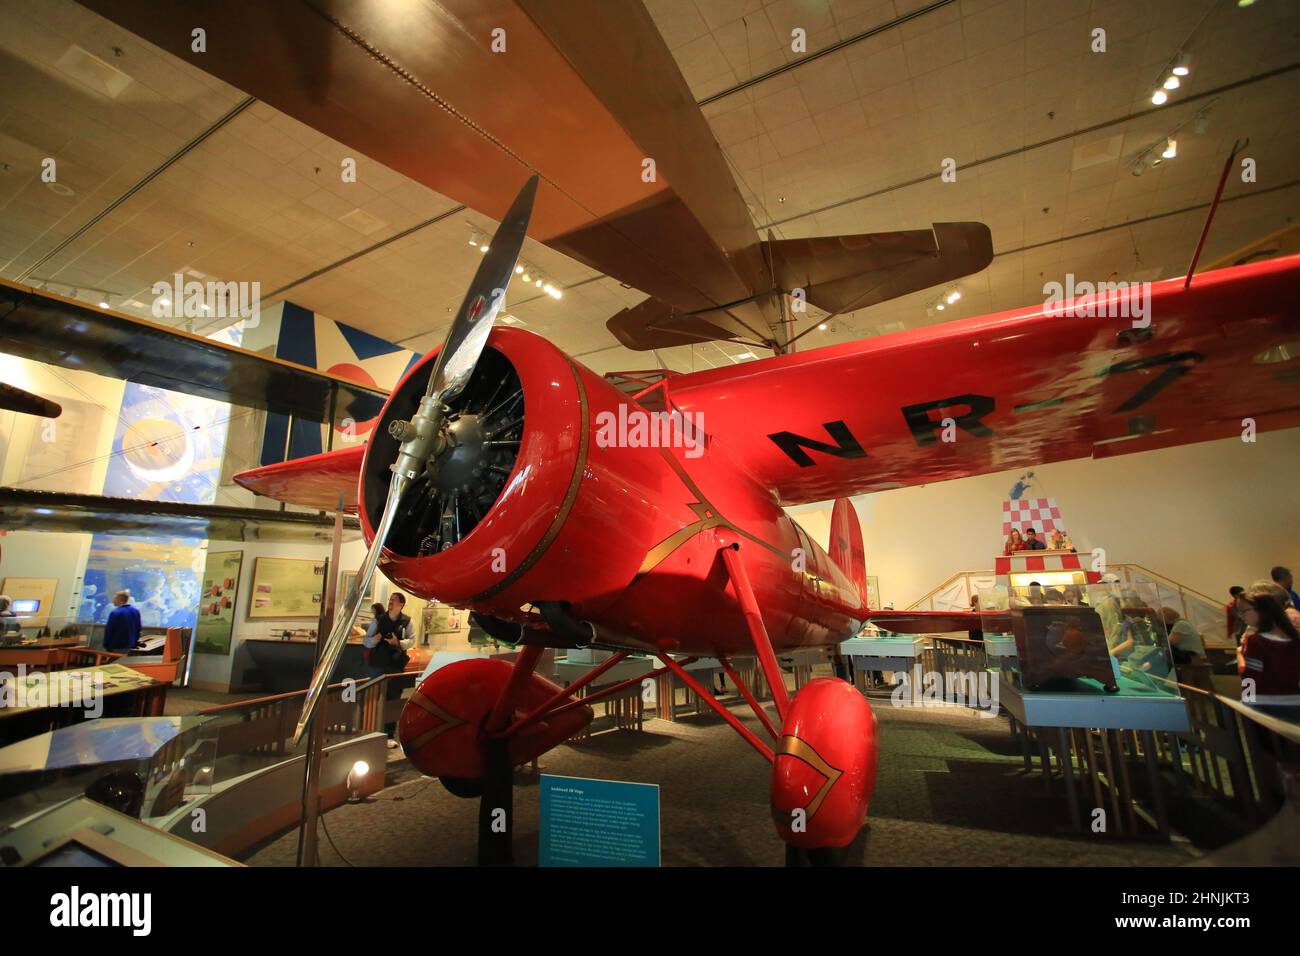 Amelia Earhart's Lockheed Vega 5B, Biplane hanging on airplane display in The Smithsonian's National Air and Space Museum Stock Photo